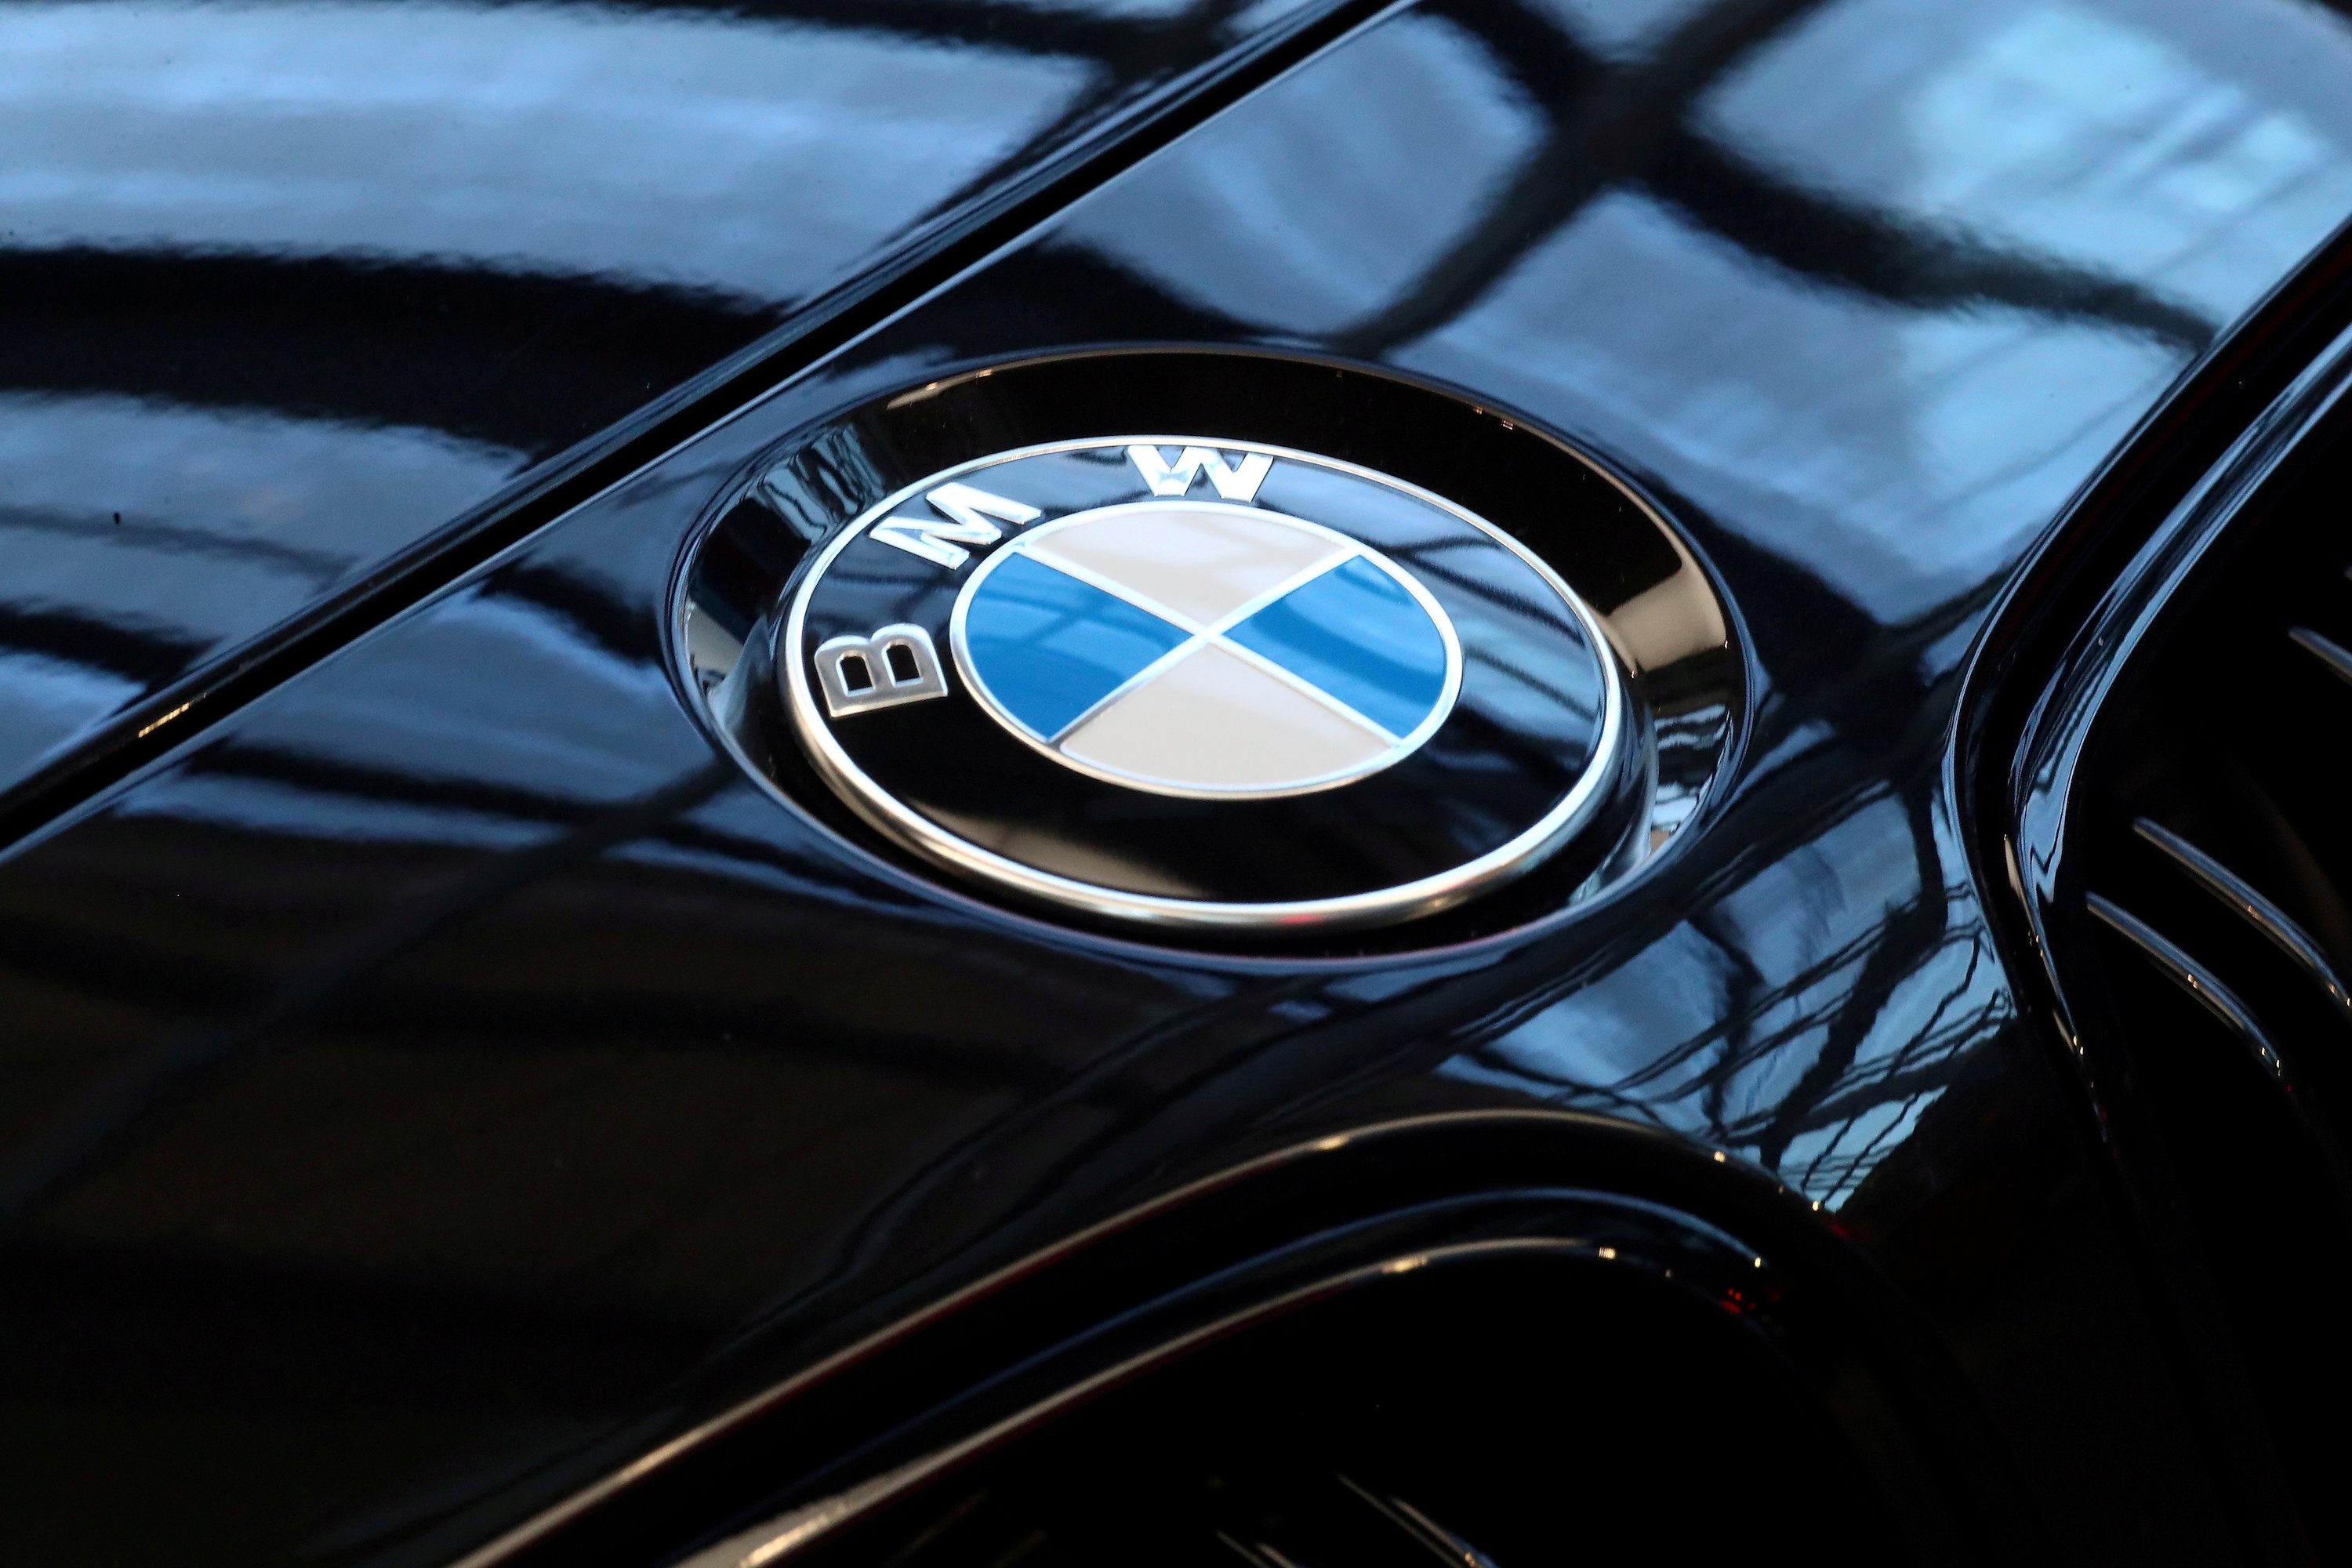 High prices, steady supply chain protect BMW from industry woes